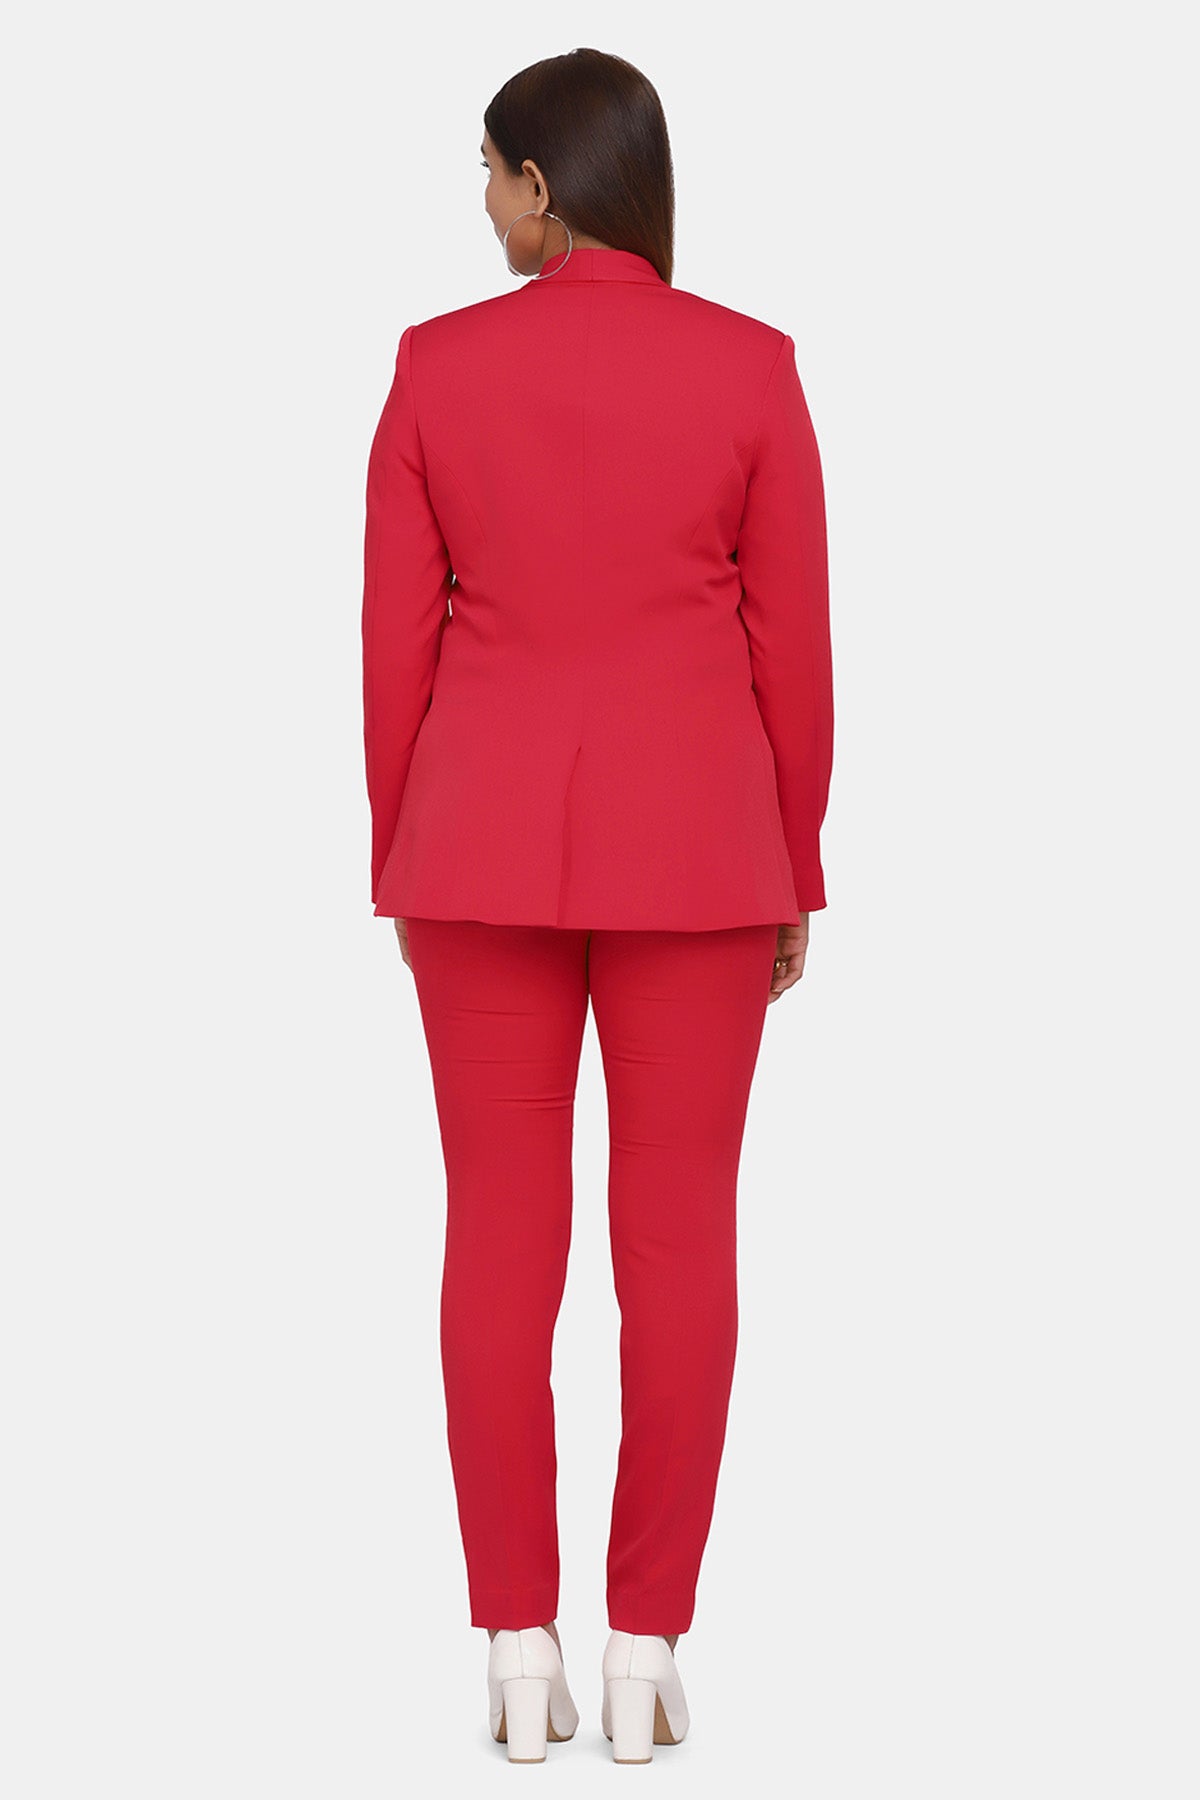 Red Casual Pant Suit